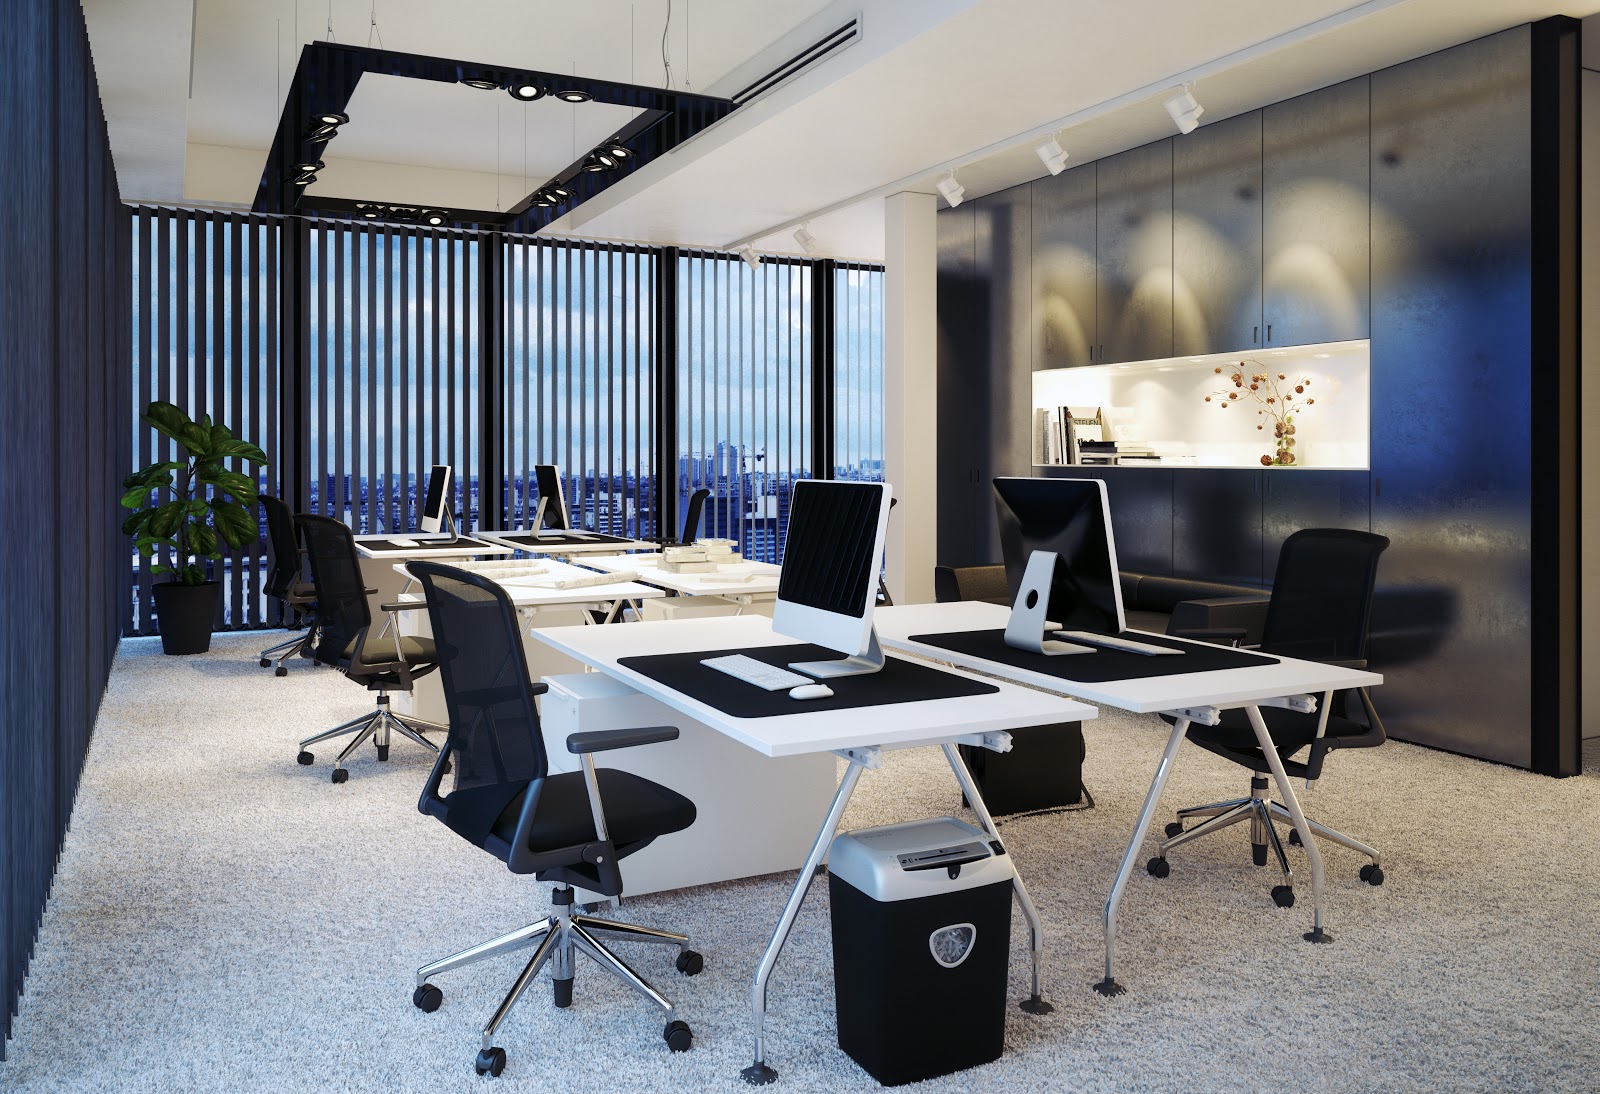 Selecting Blinds for Your Office Space